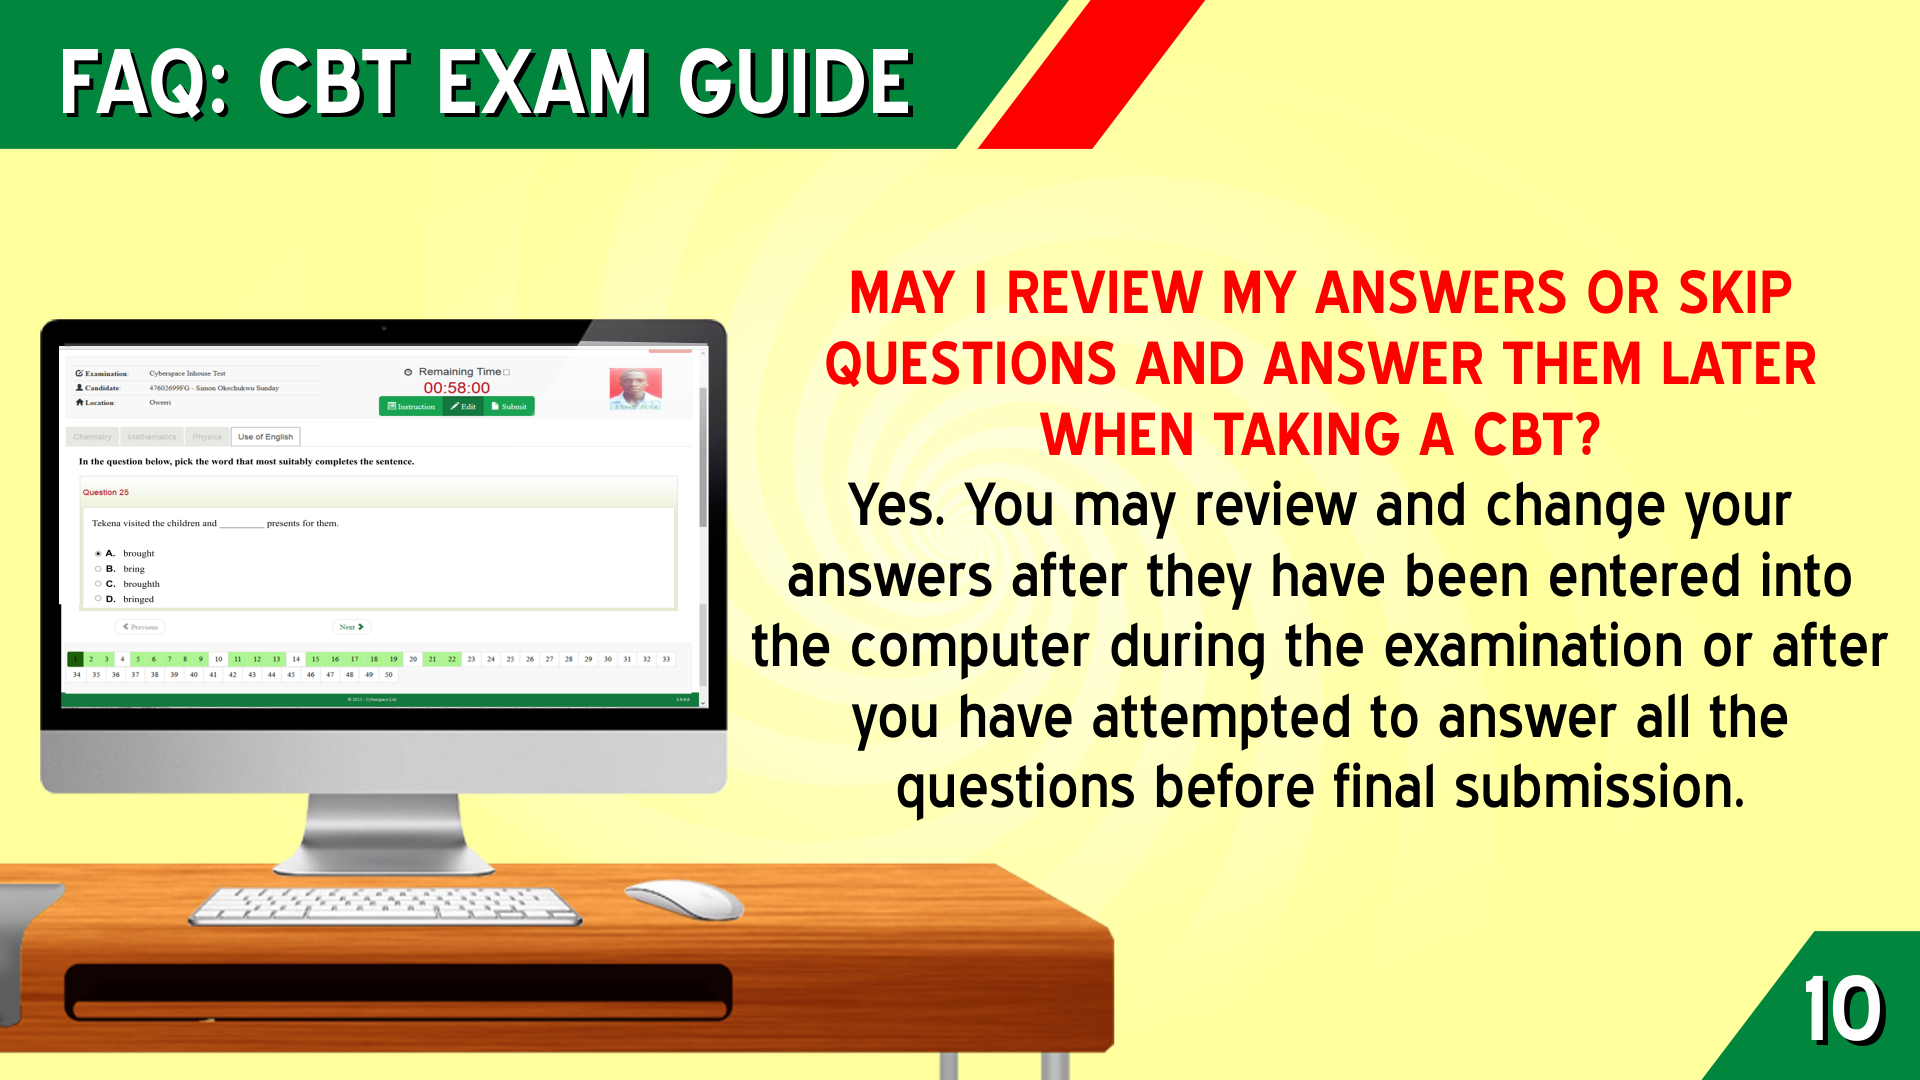 13. MAY I REVIEW MY ANSWERS OR SKIP  QUESTIONS AND ANSWER THEM LATER WHEN TAKING A CBT?